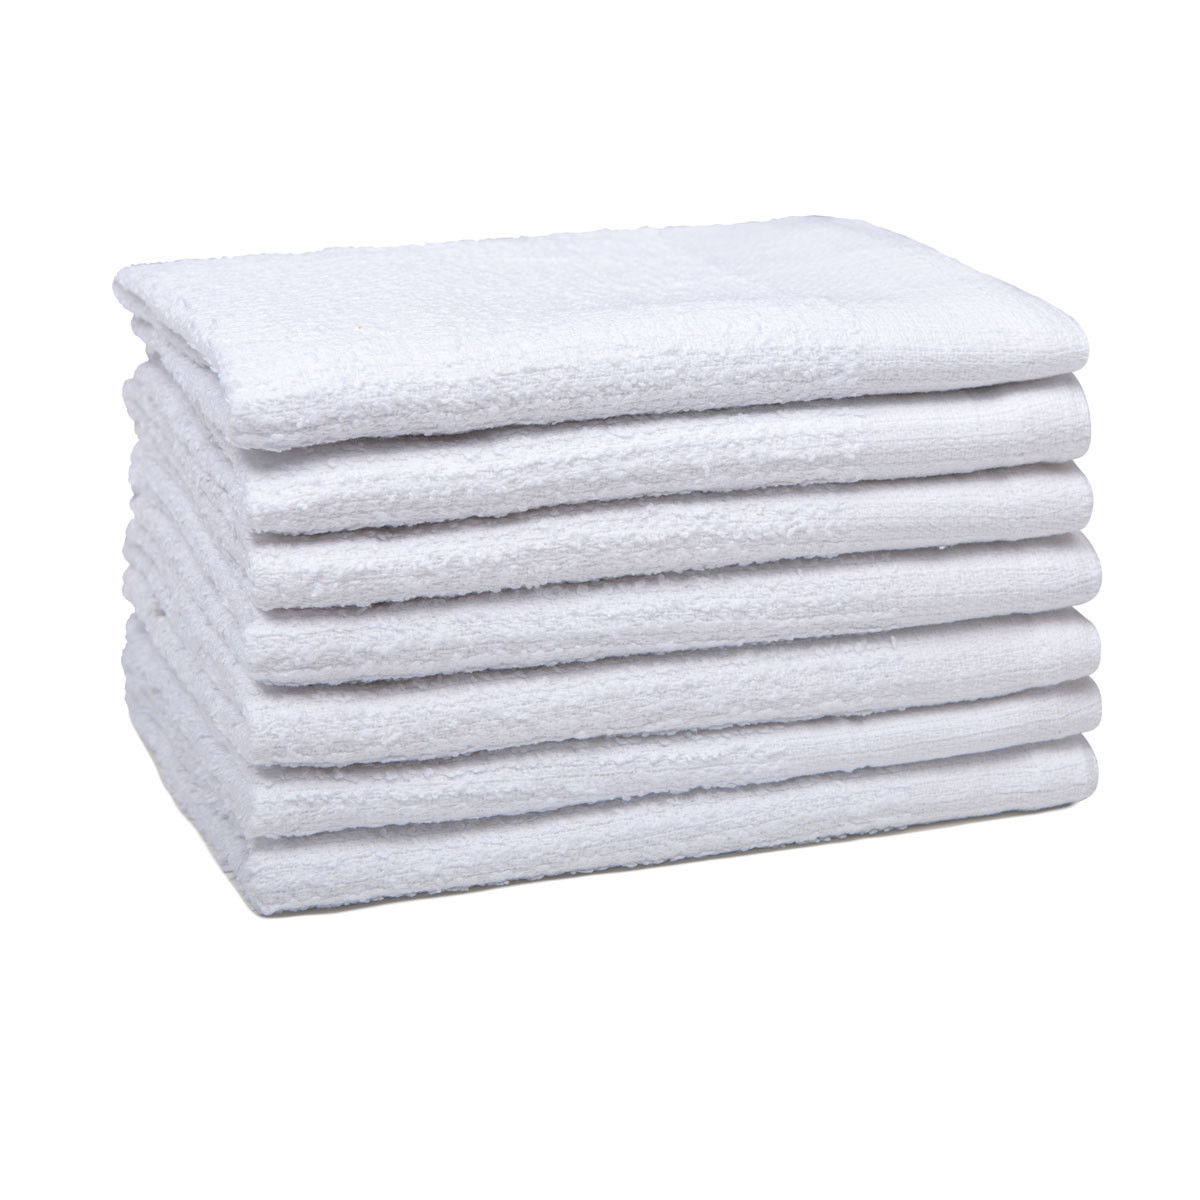 What color choices for bar towels are offered in Wholesale Bar Mop Towels by Intralin?